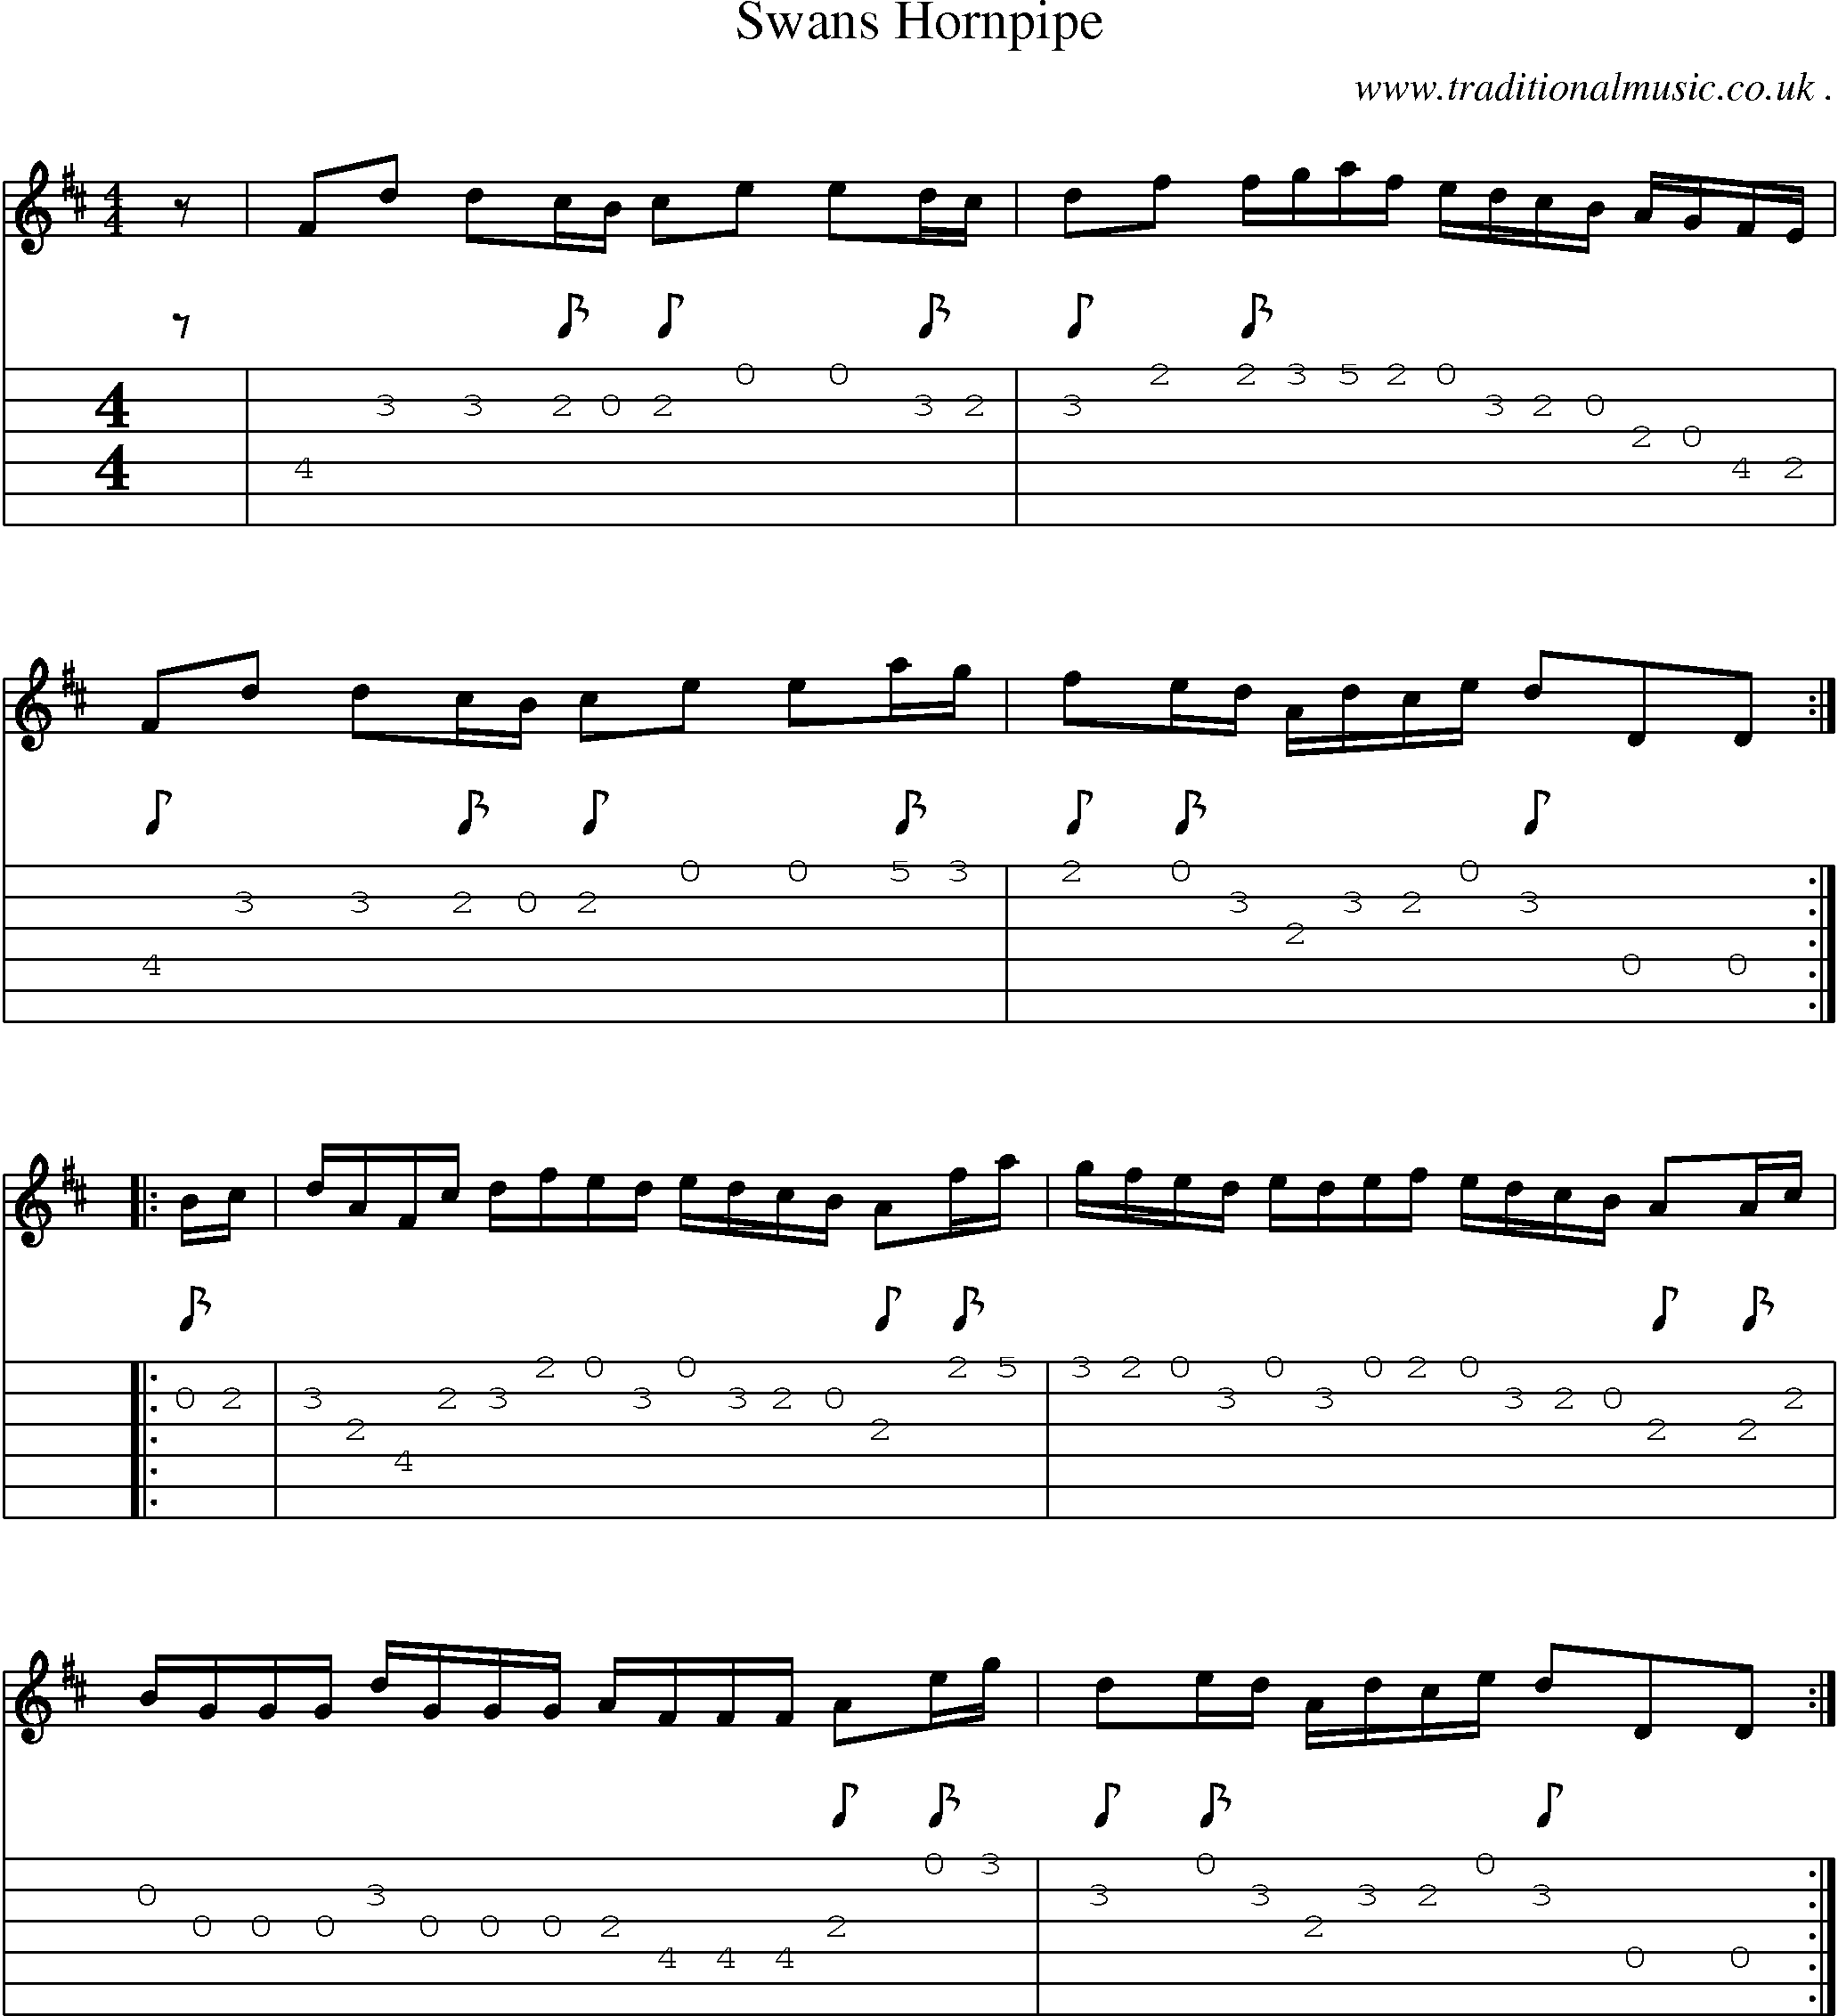 Sheet-Music and Guitar Tabs for Swans Hornpipe